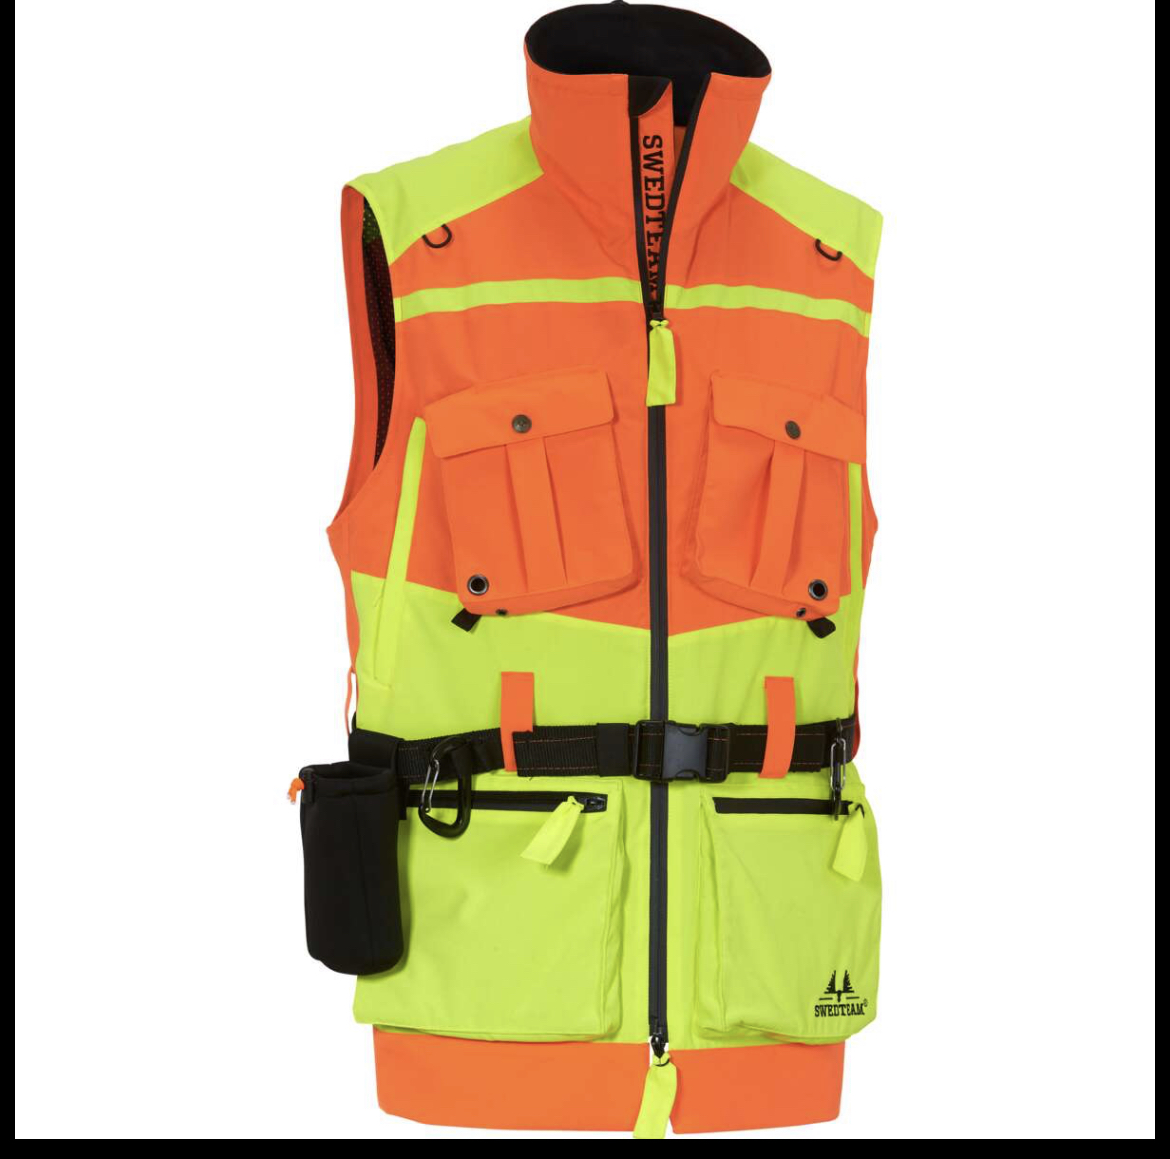 Protect Hunting vest